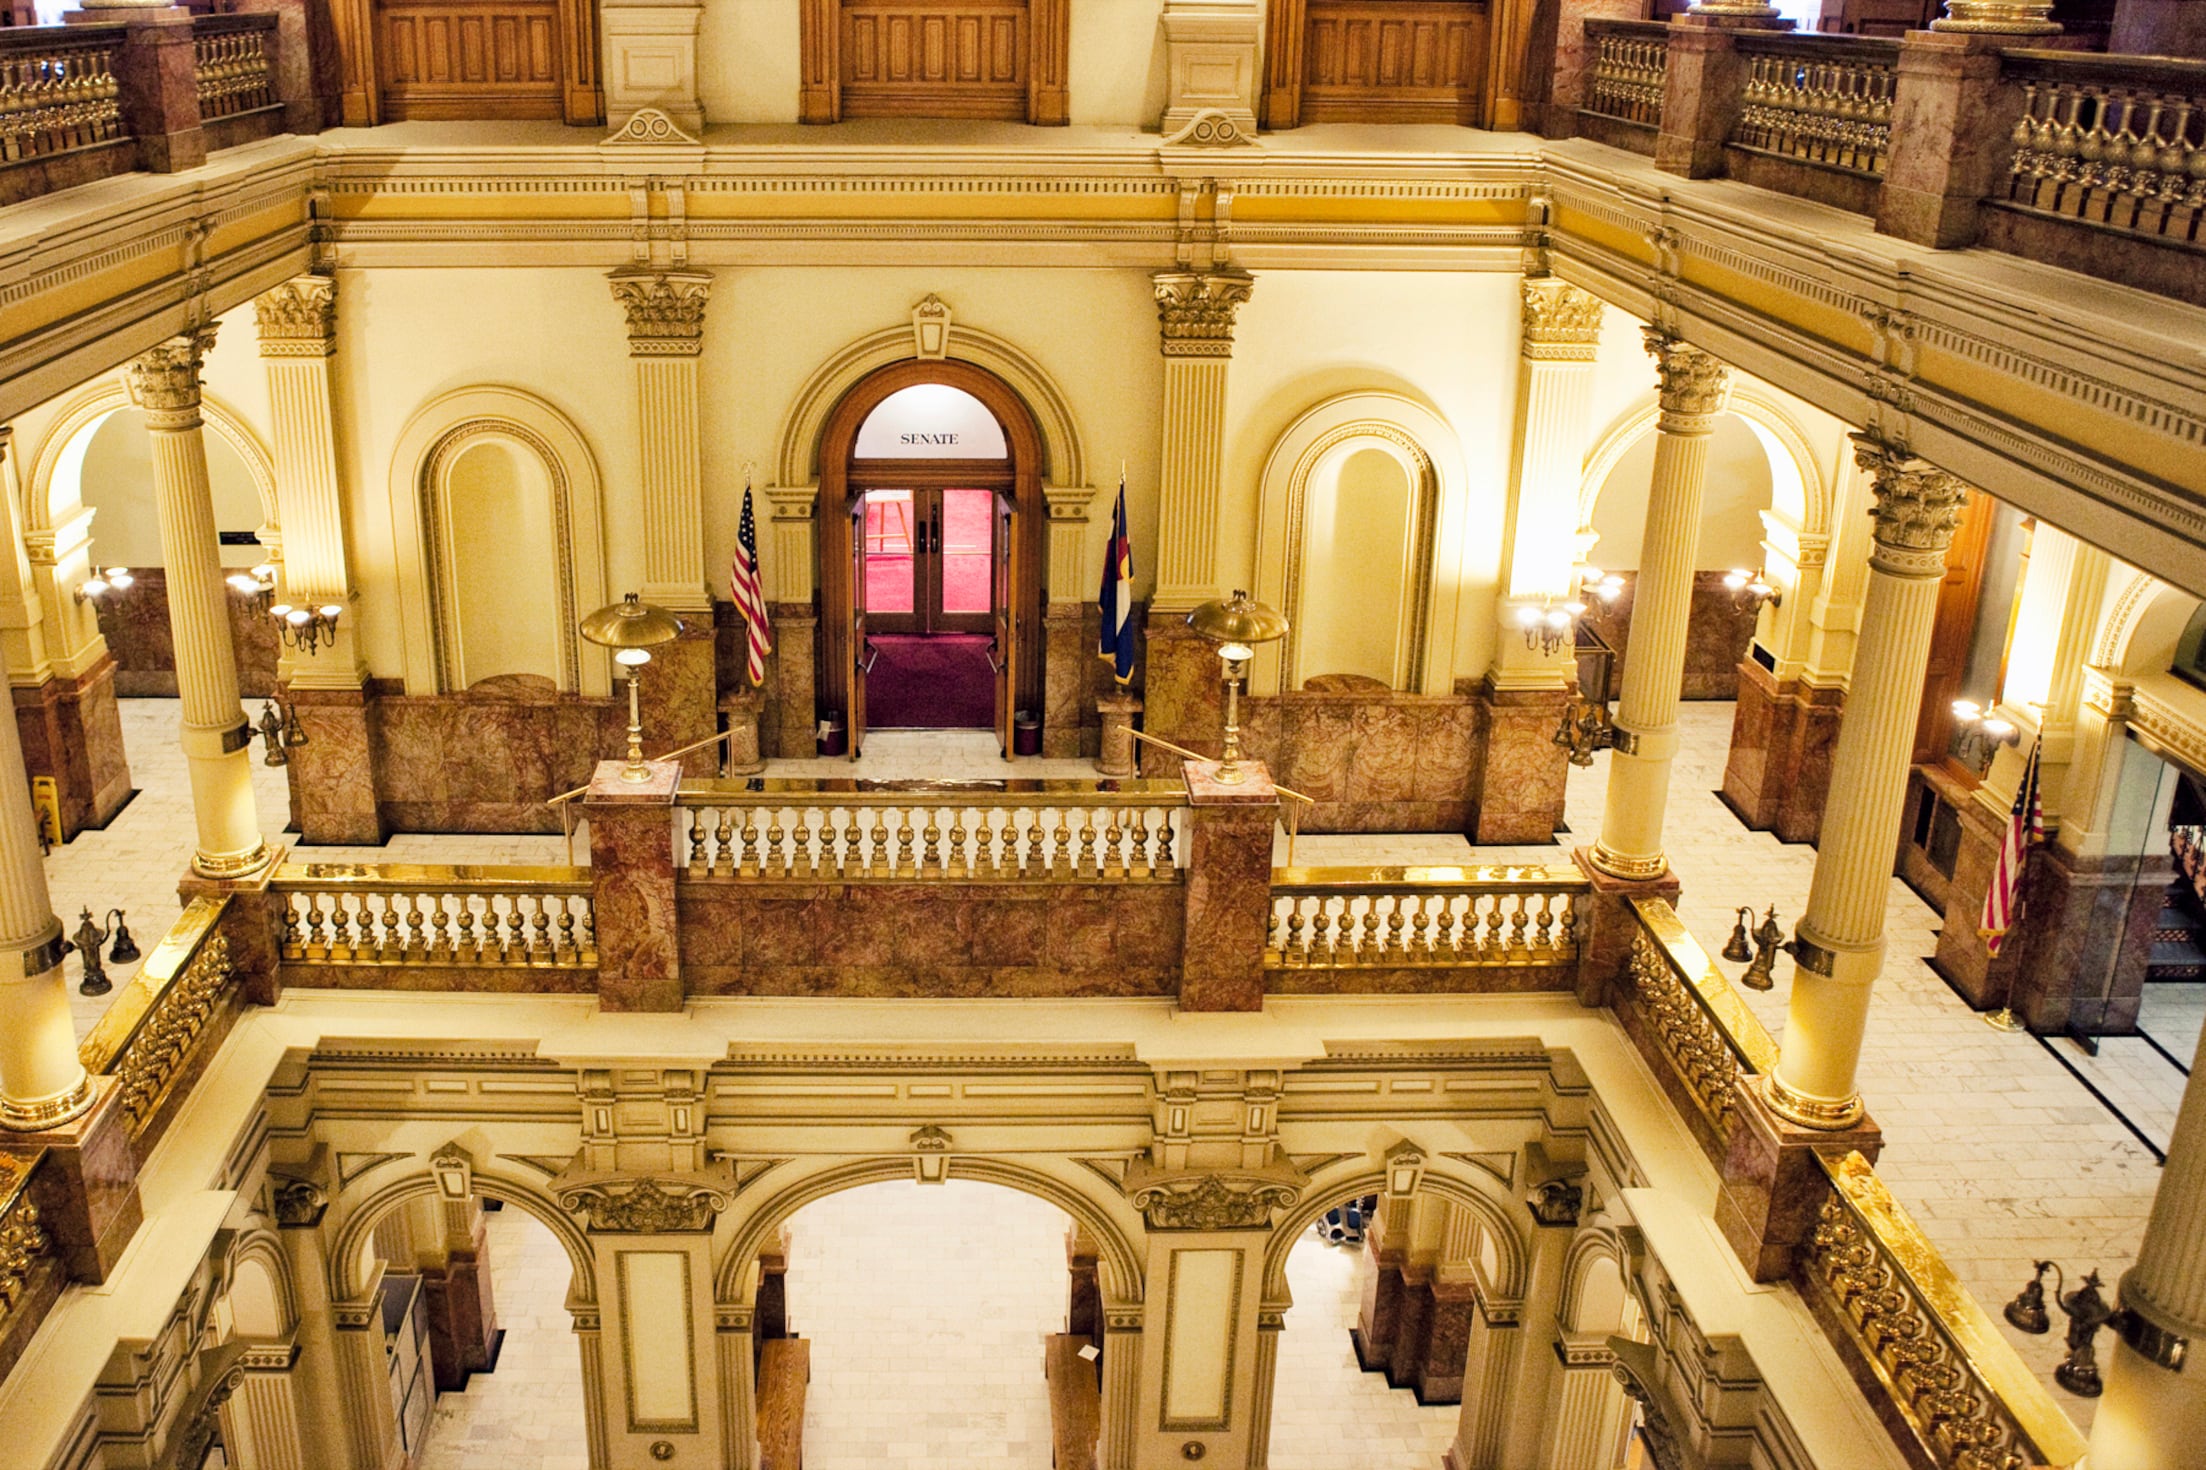 An inside view of the Colorado Capitol building with light stone walls and pillars and wooden doors and features.